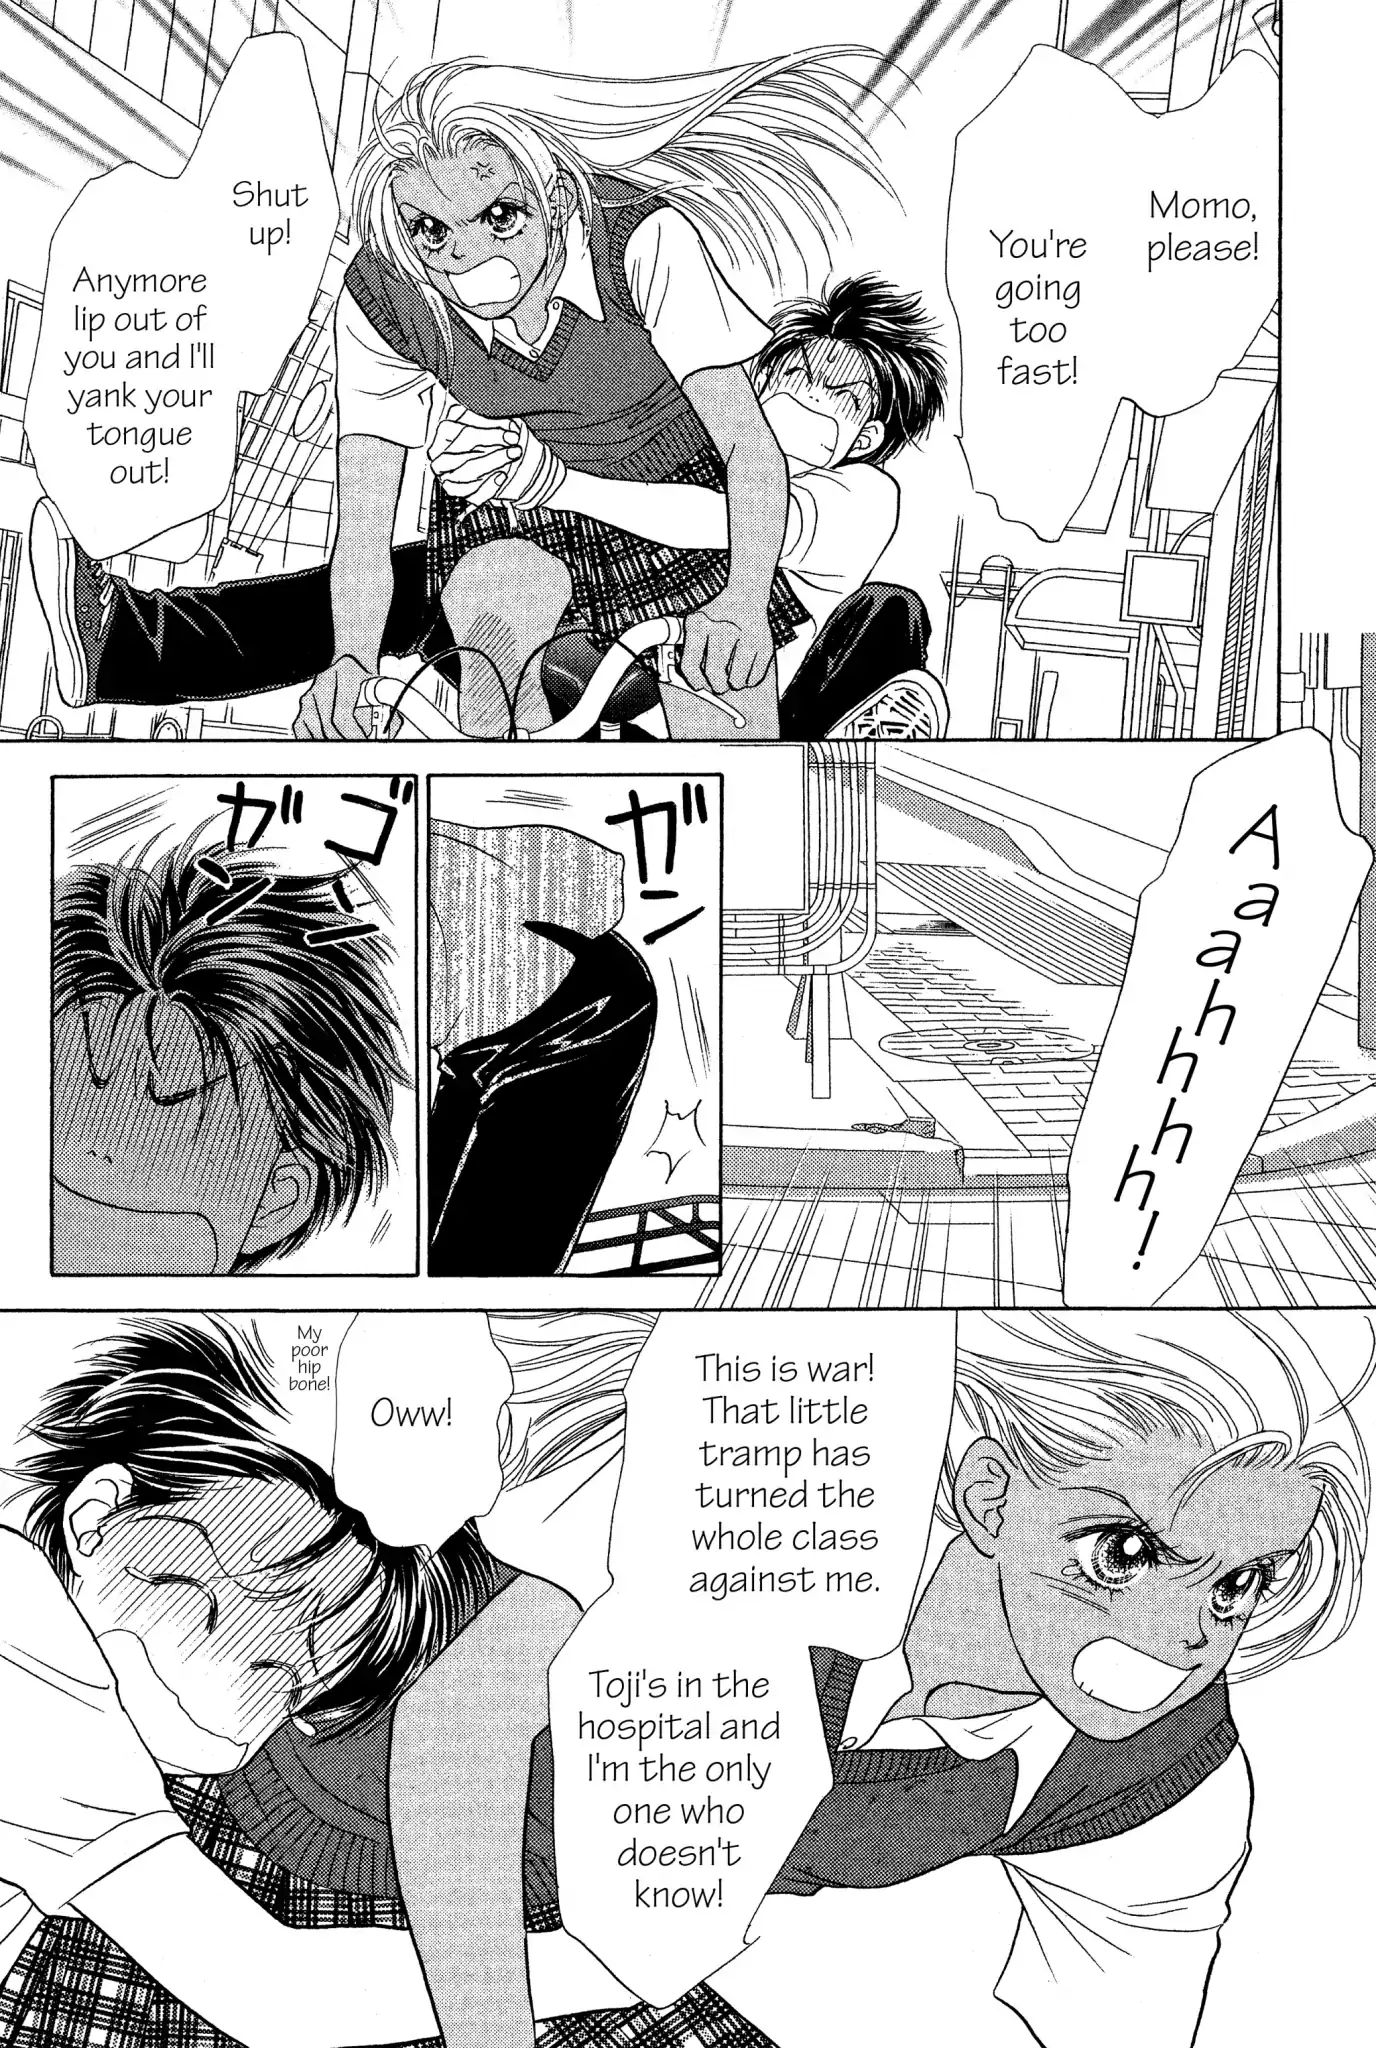 Peach Girl - Page 2